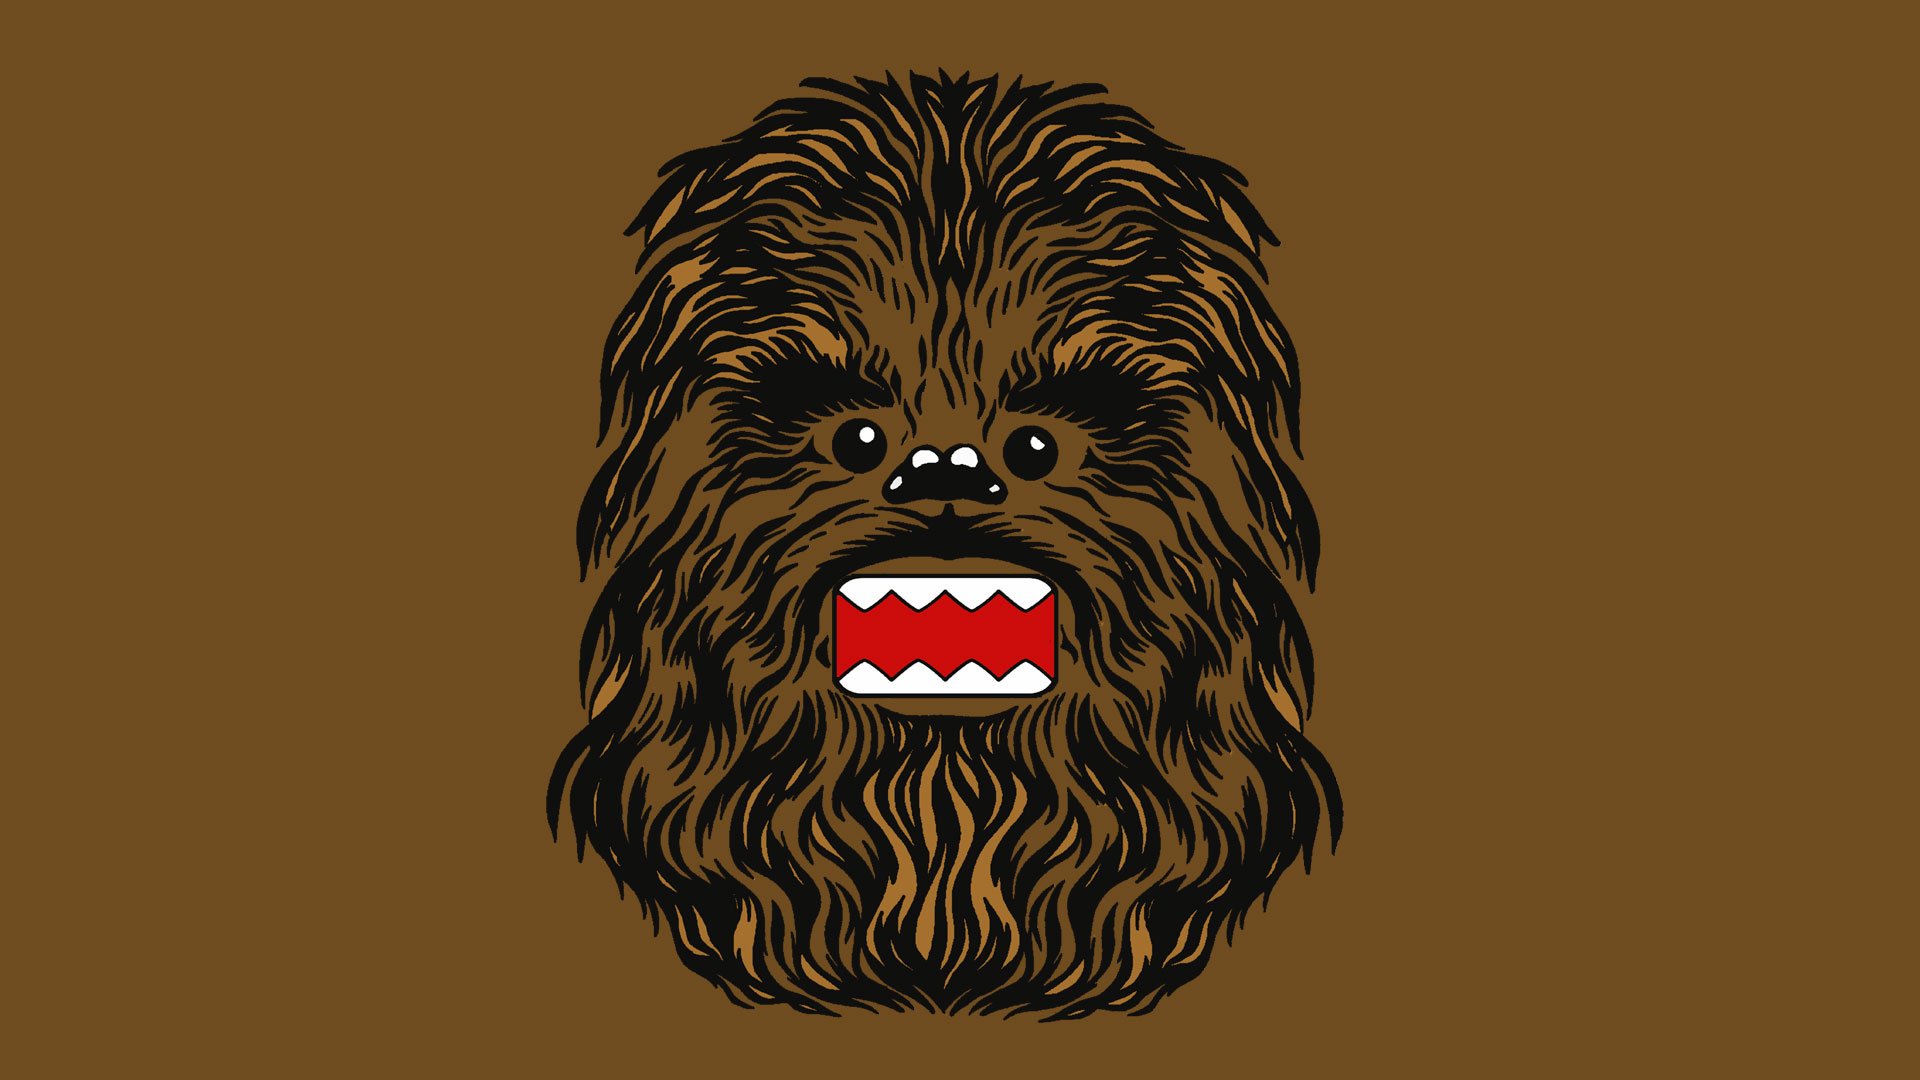 Free download 82 Chewbacca HD Wallpaper Background Image [1920x1080] for your Desktop, Mobile & Tablet. Explore Chewbacca Background. Chewbacca Wallpaper, Chewbacca Background, Baby Chewbacca Wallpaper